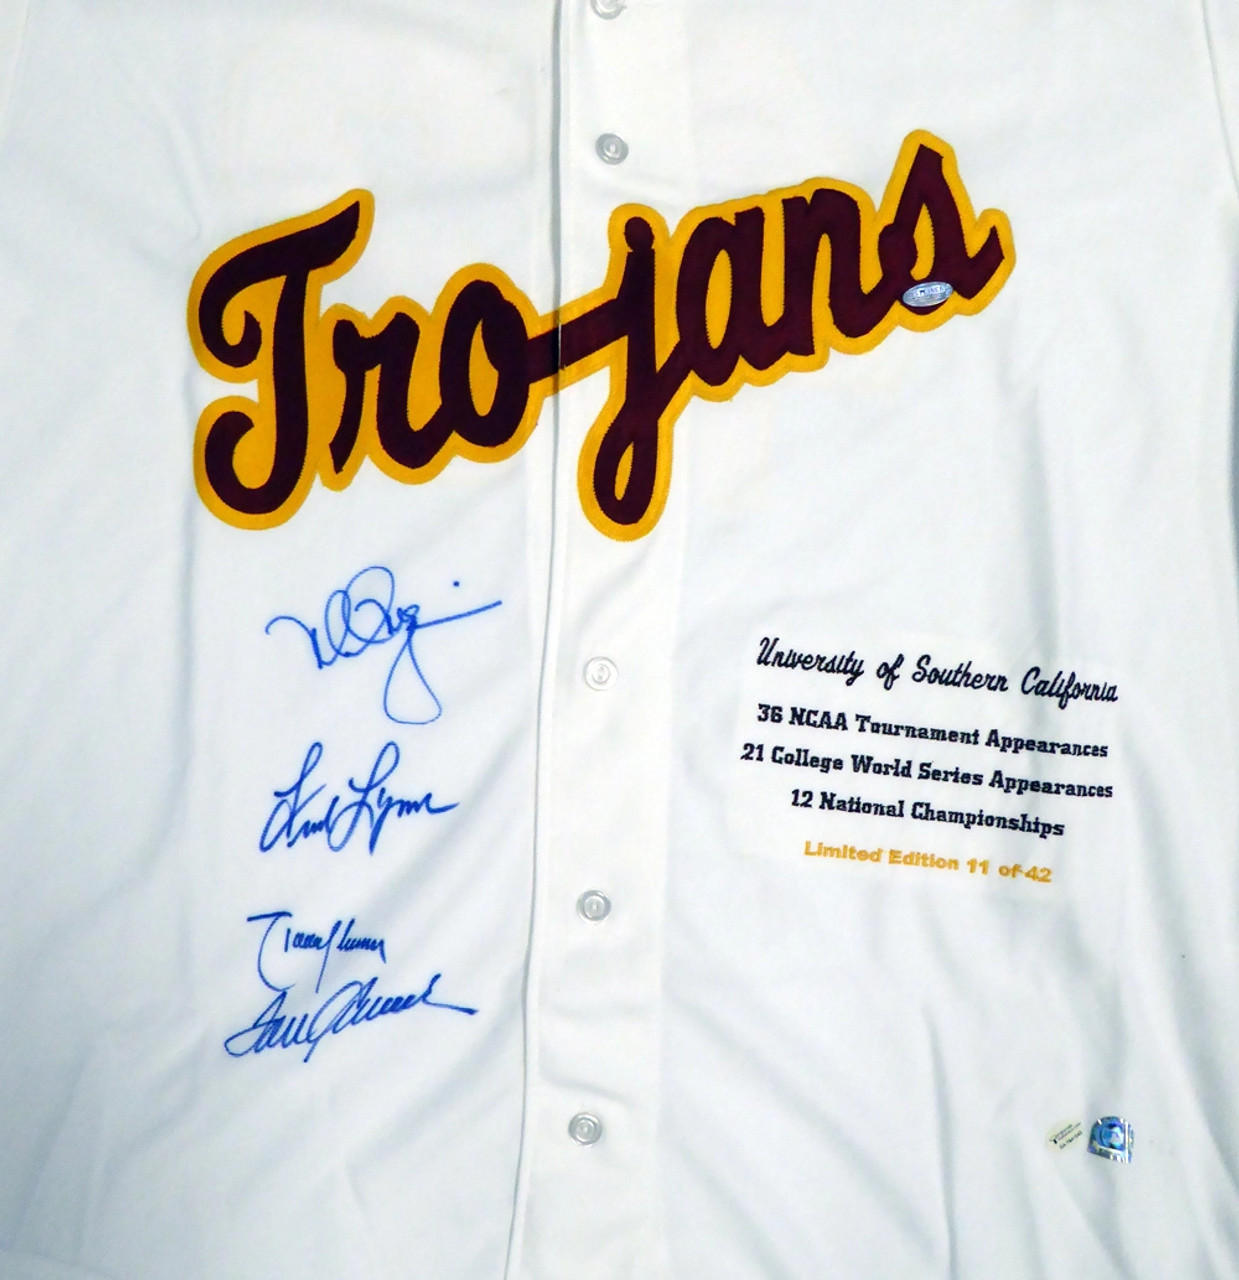 USC Trojans Legends Autographed White Jersey With 4 Signatures Including  Tom Seaver, Mark McGwire, Randy Johnson & Fred Lynn Limited Edition #/42  Steiner Holo